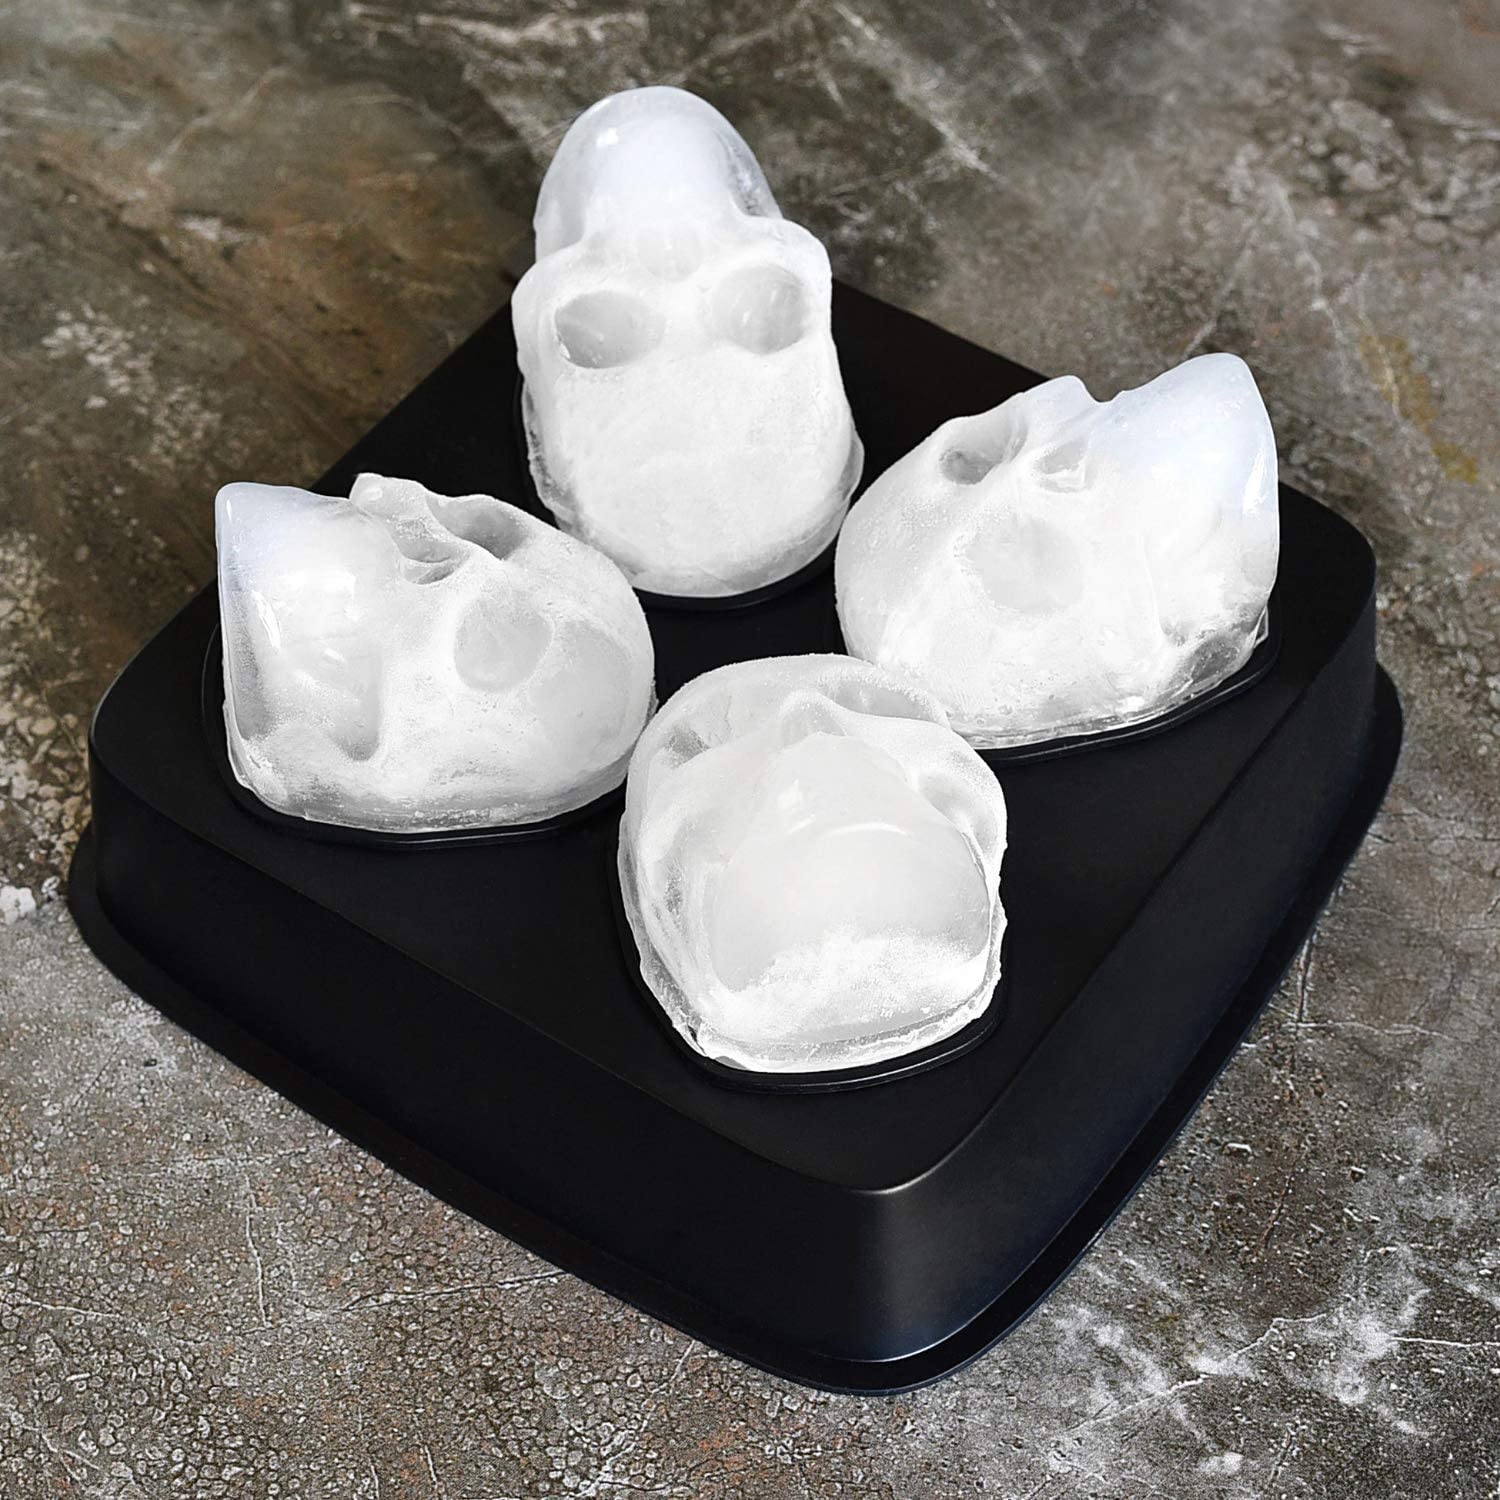 A black silicone ice cube mold with four skull shaped ice cube examples resting in the molds of the tray.